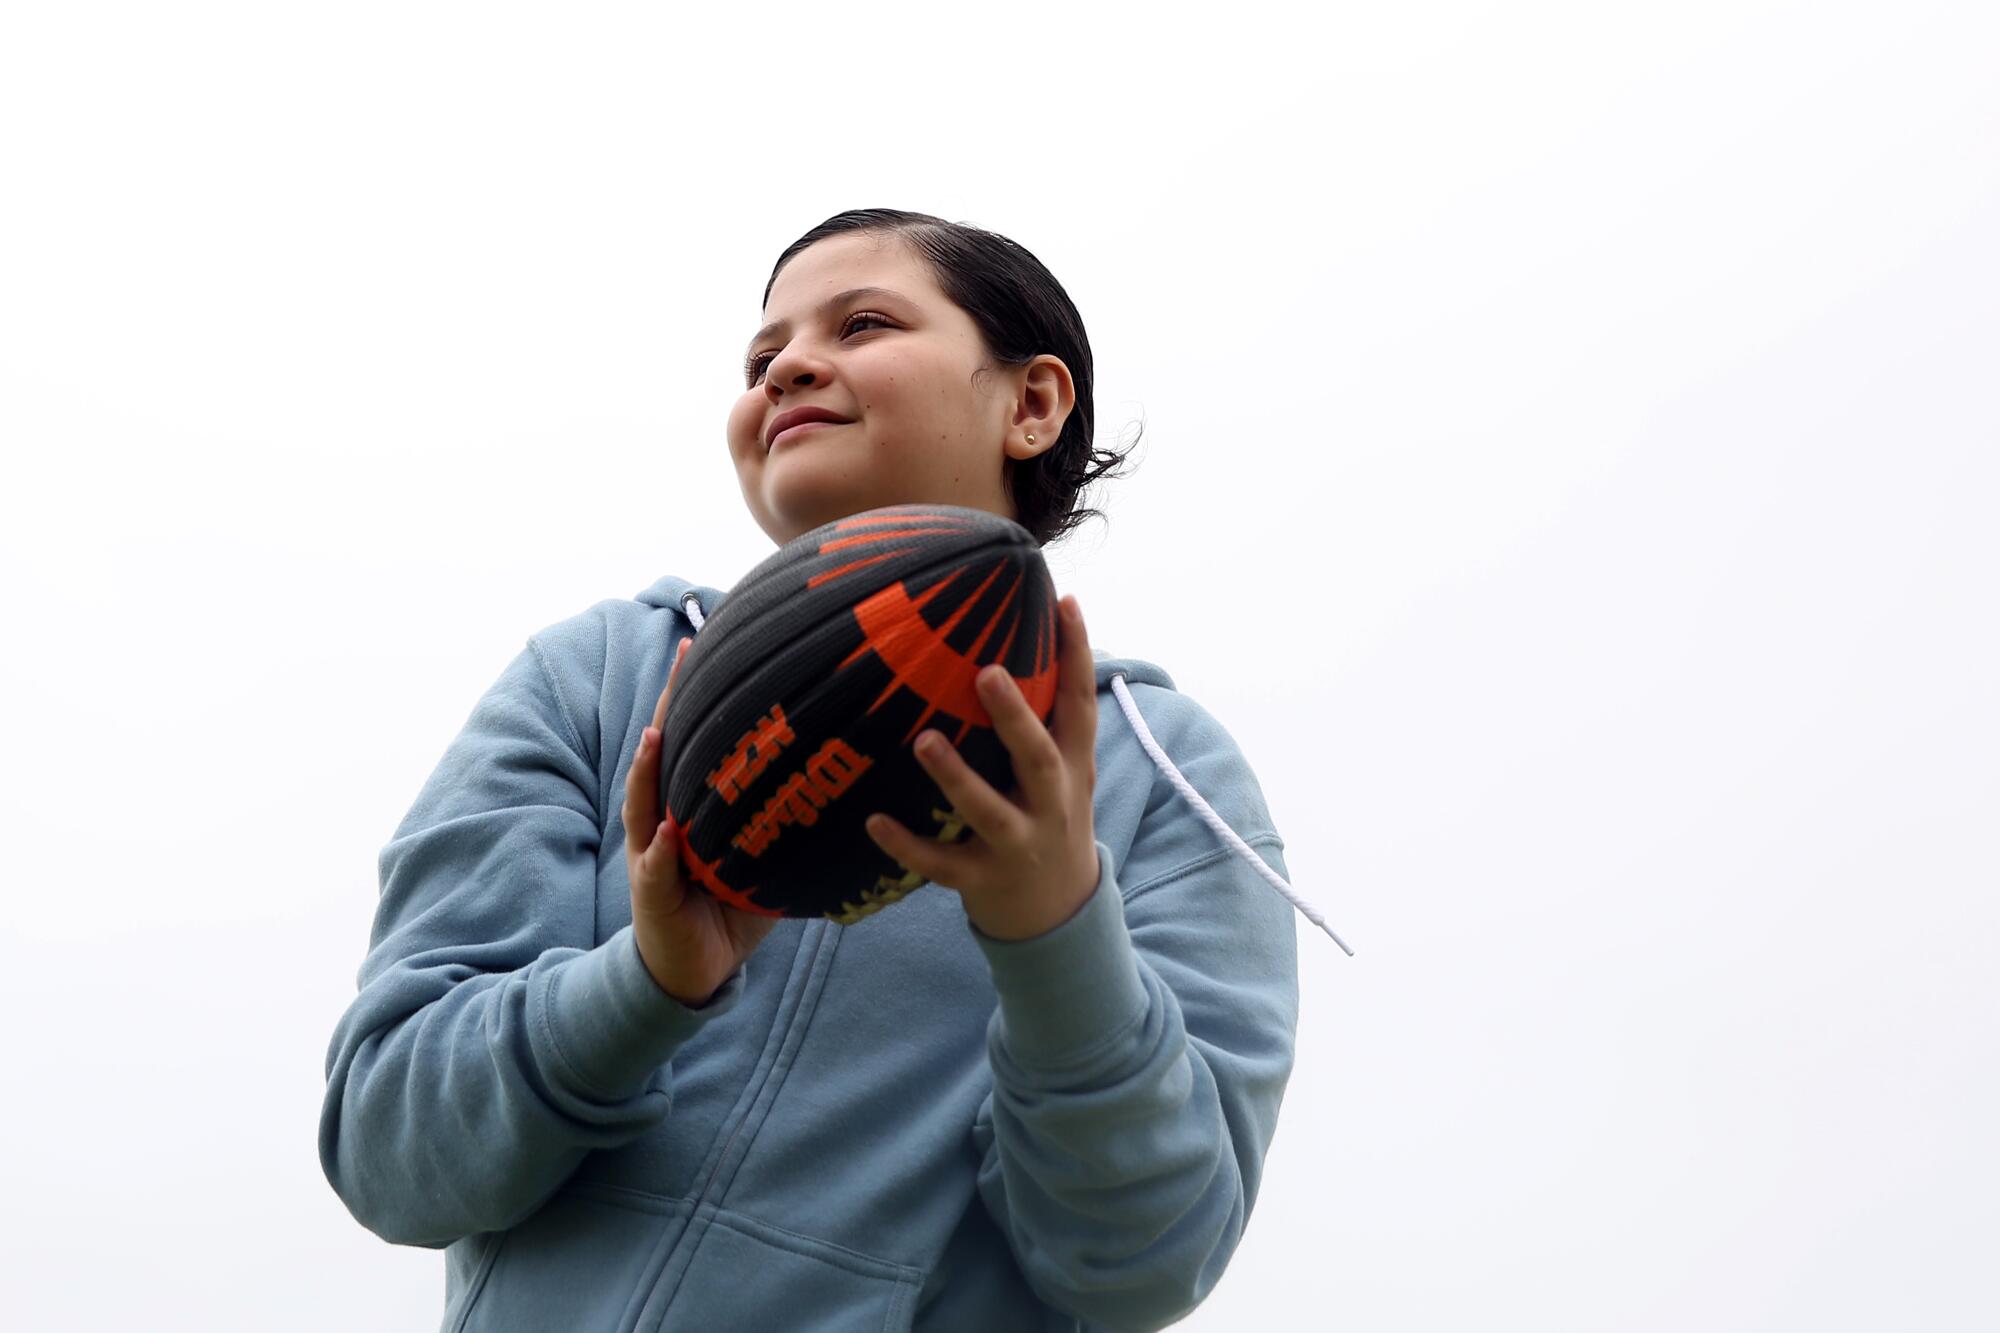  Kayla Diaz, 12, tosses the football with her mom at Point Fermin Park.